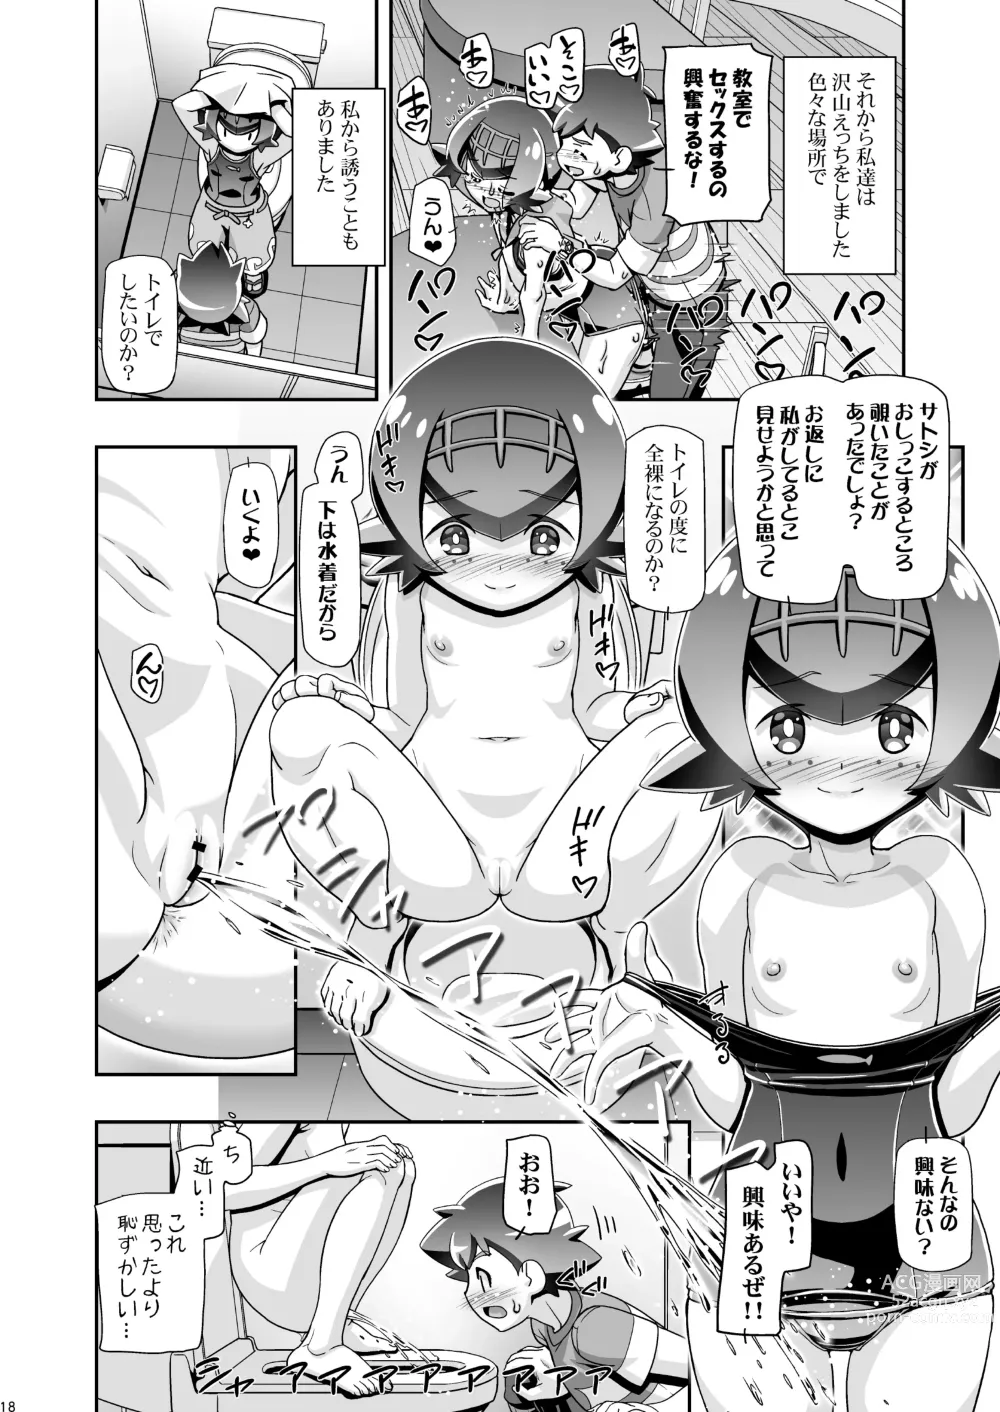 Page 17 of doujinshi PM GALS SUNMOON